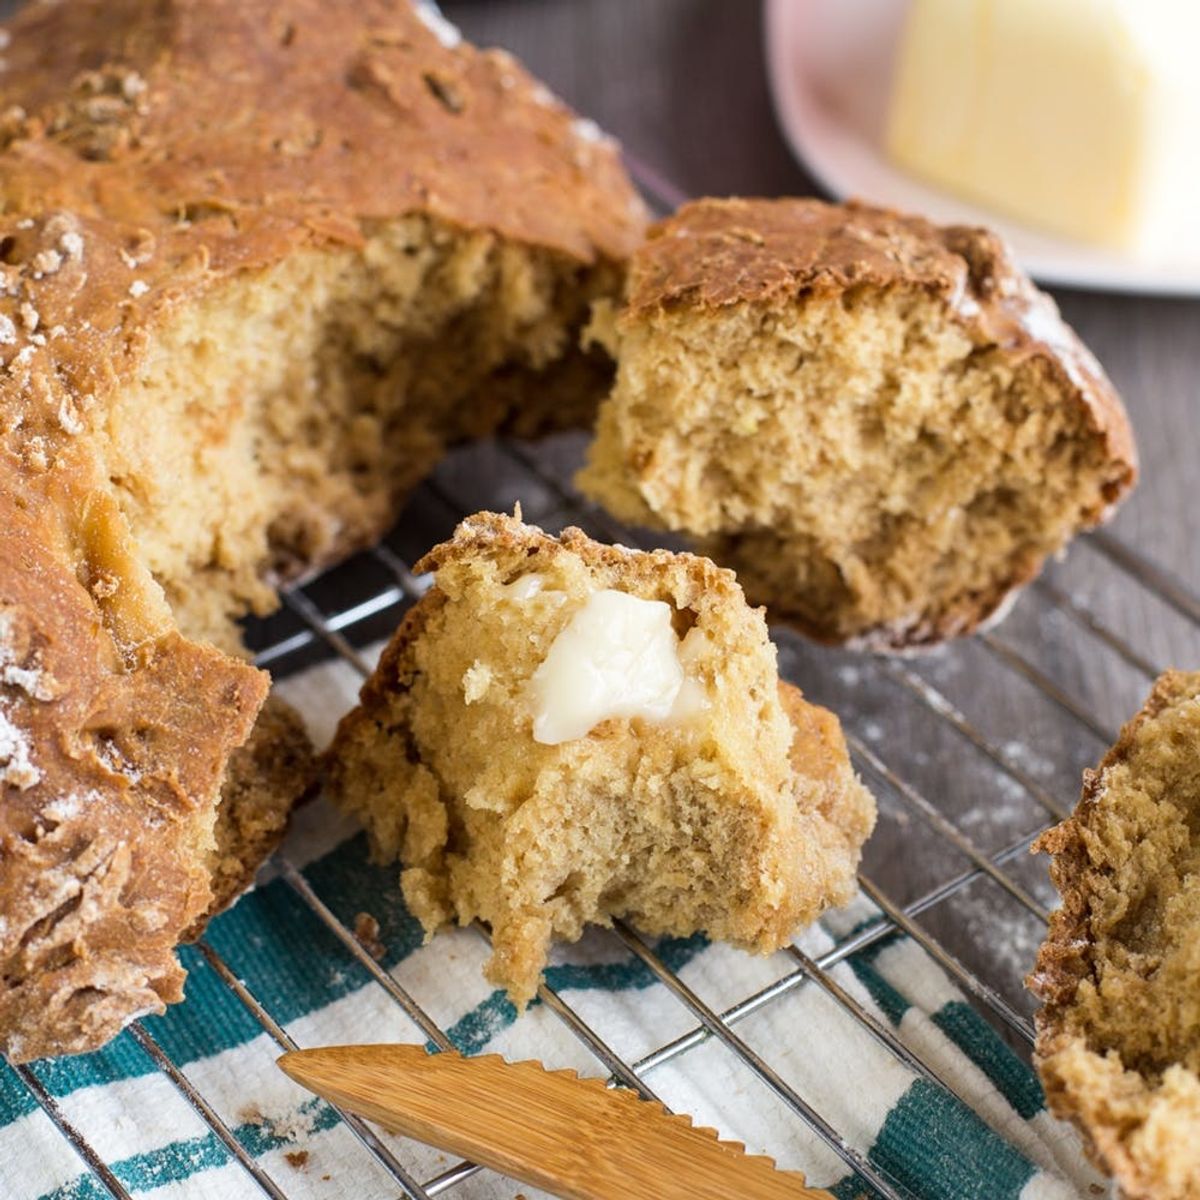 Carb Up This St. Patrick’s Day With This Easy Dutch Oven Soda Bread Recipe